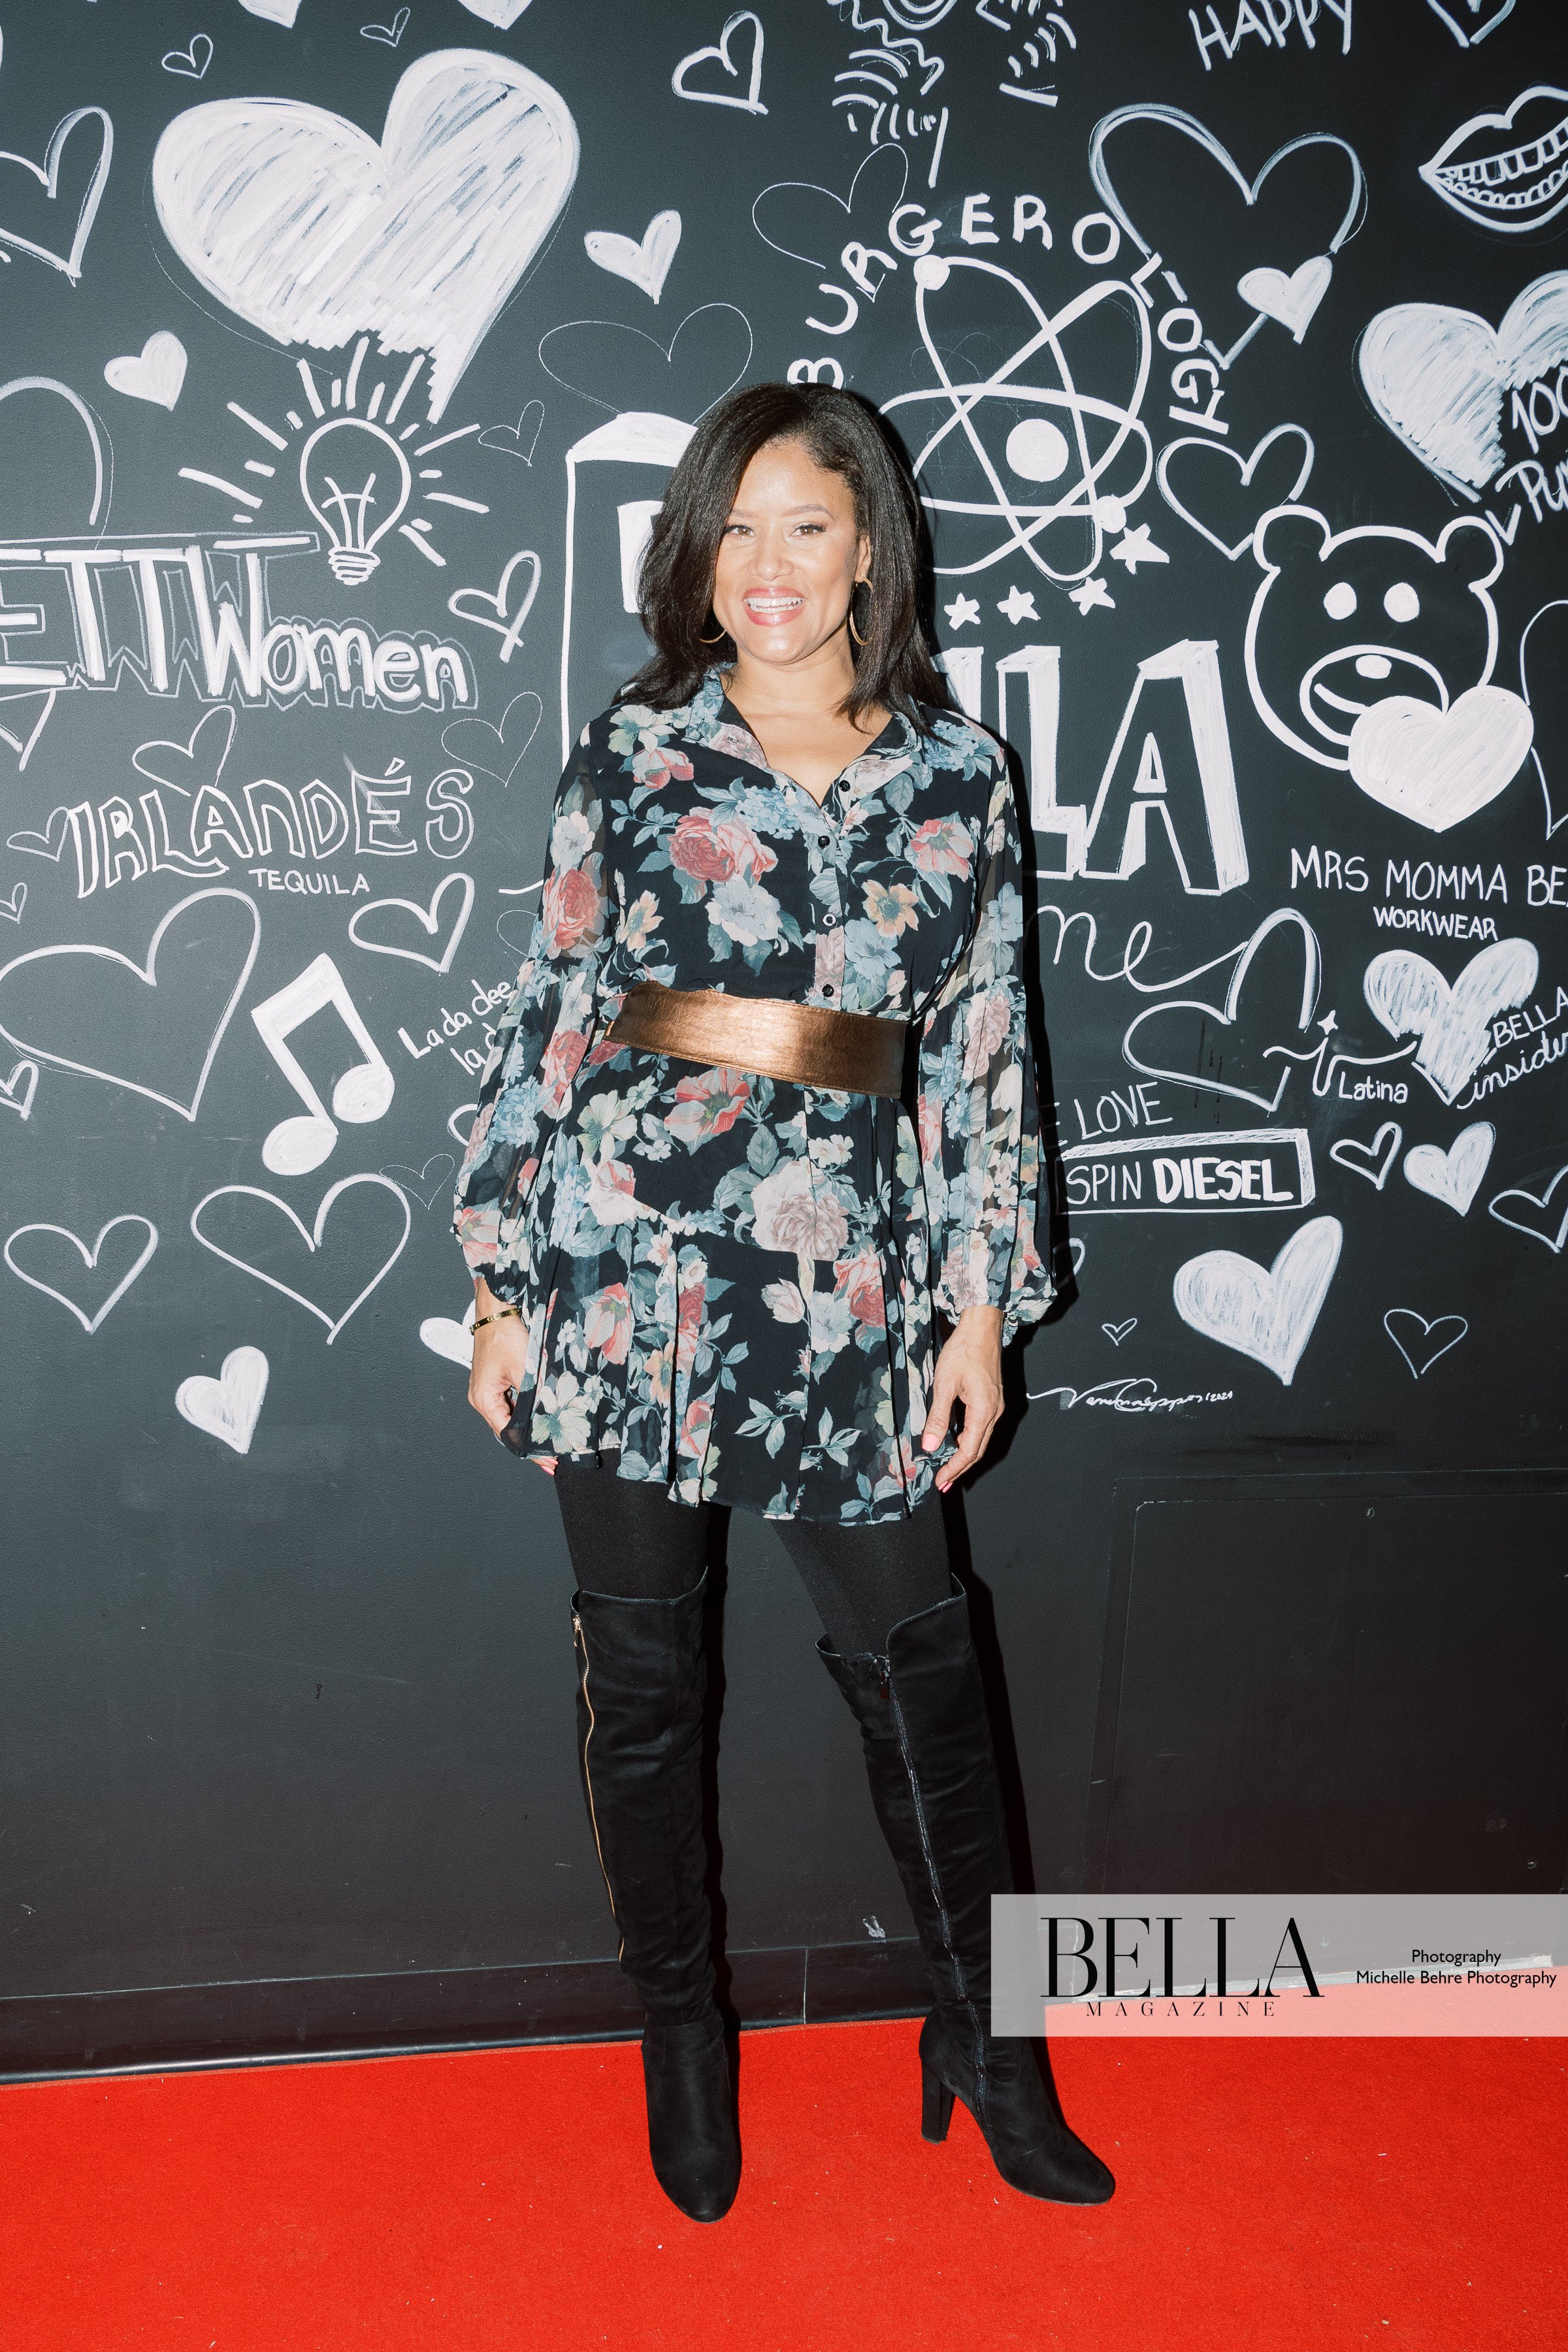 Michelle-Behre-Creative-Co-BELLA-Magazine-Women-of-Influence-Cover-Party-Burgerology-173.jpg